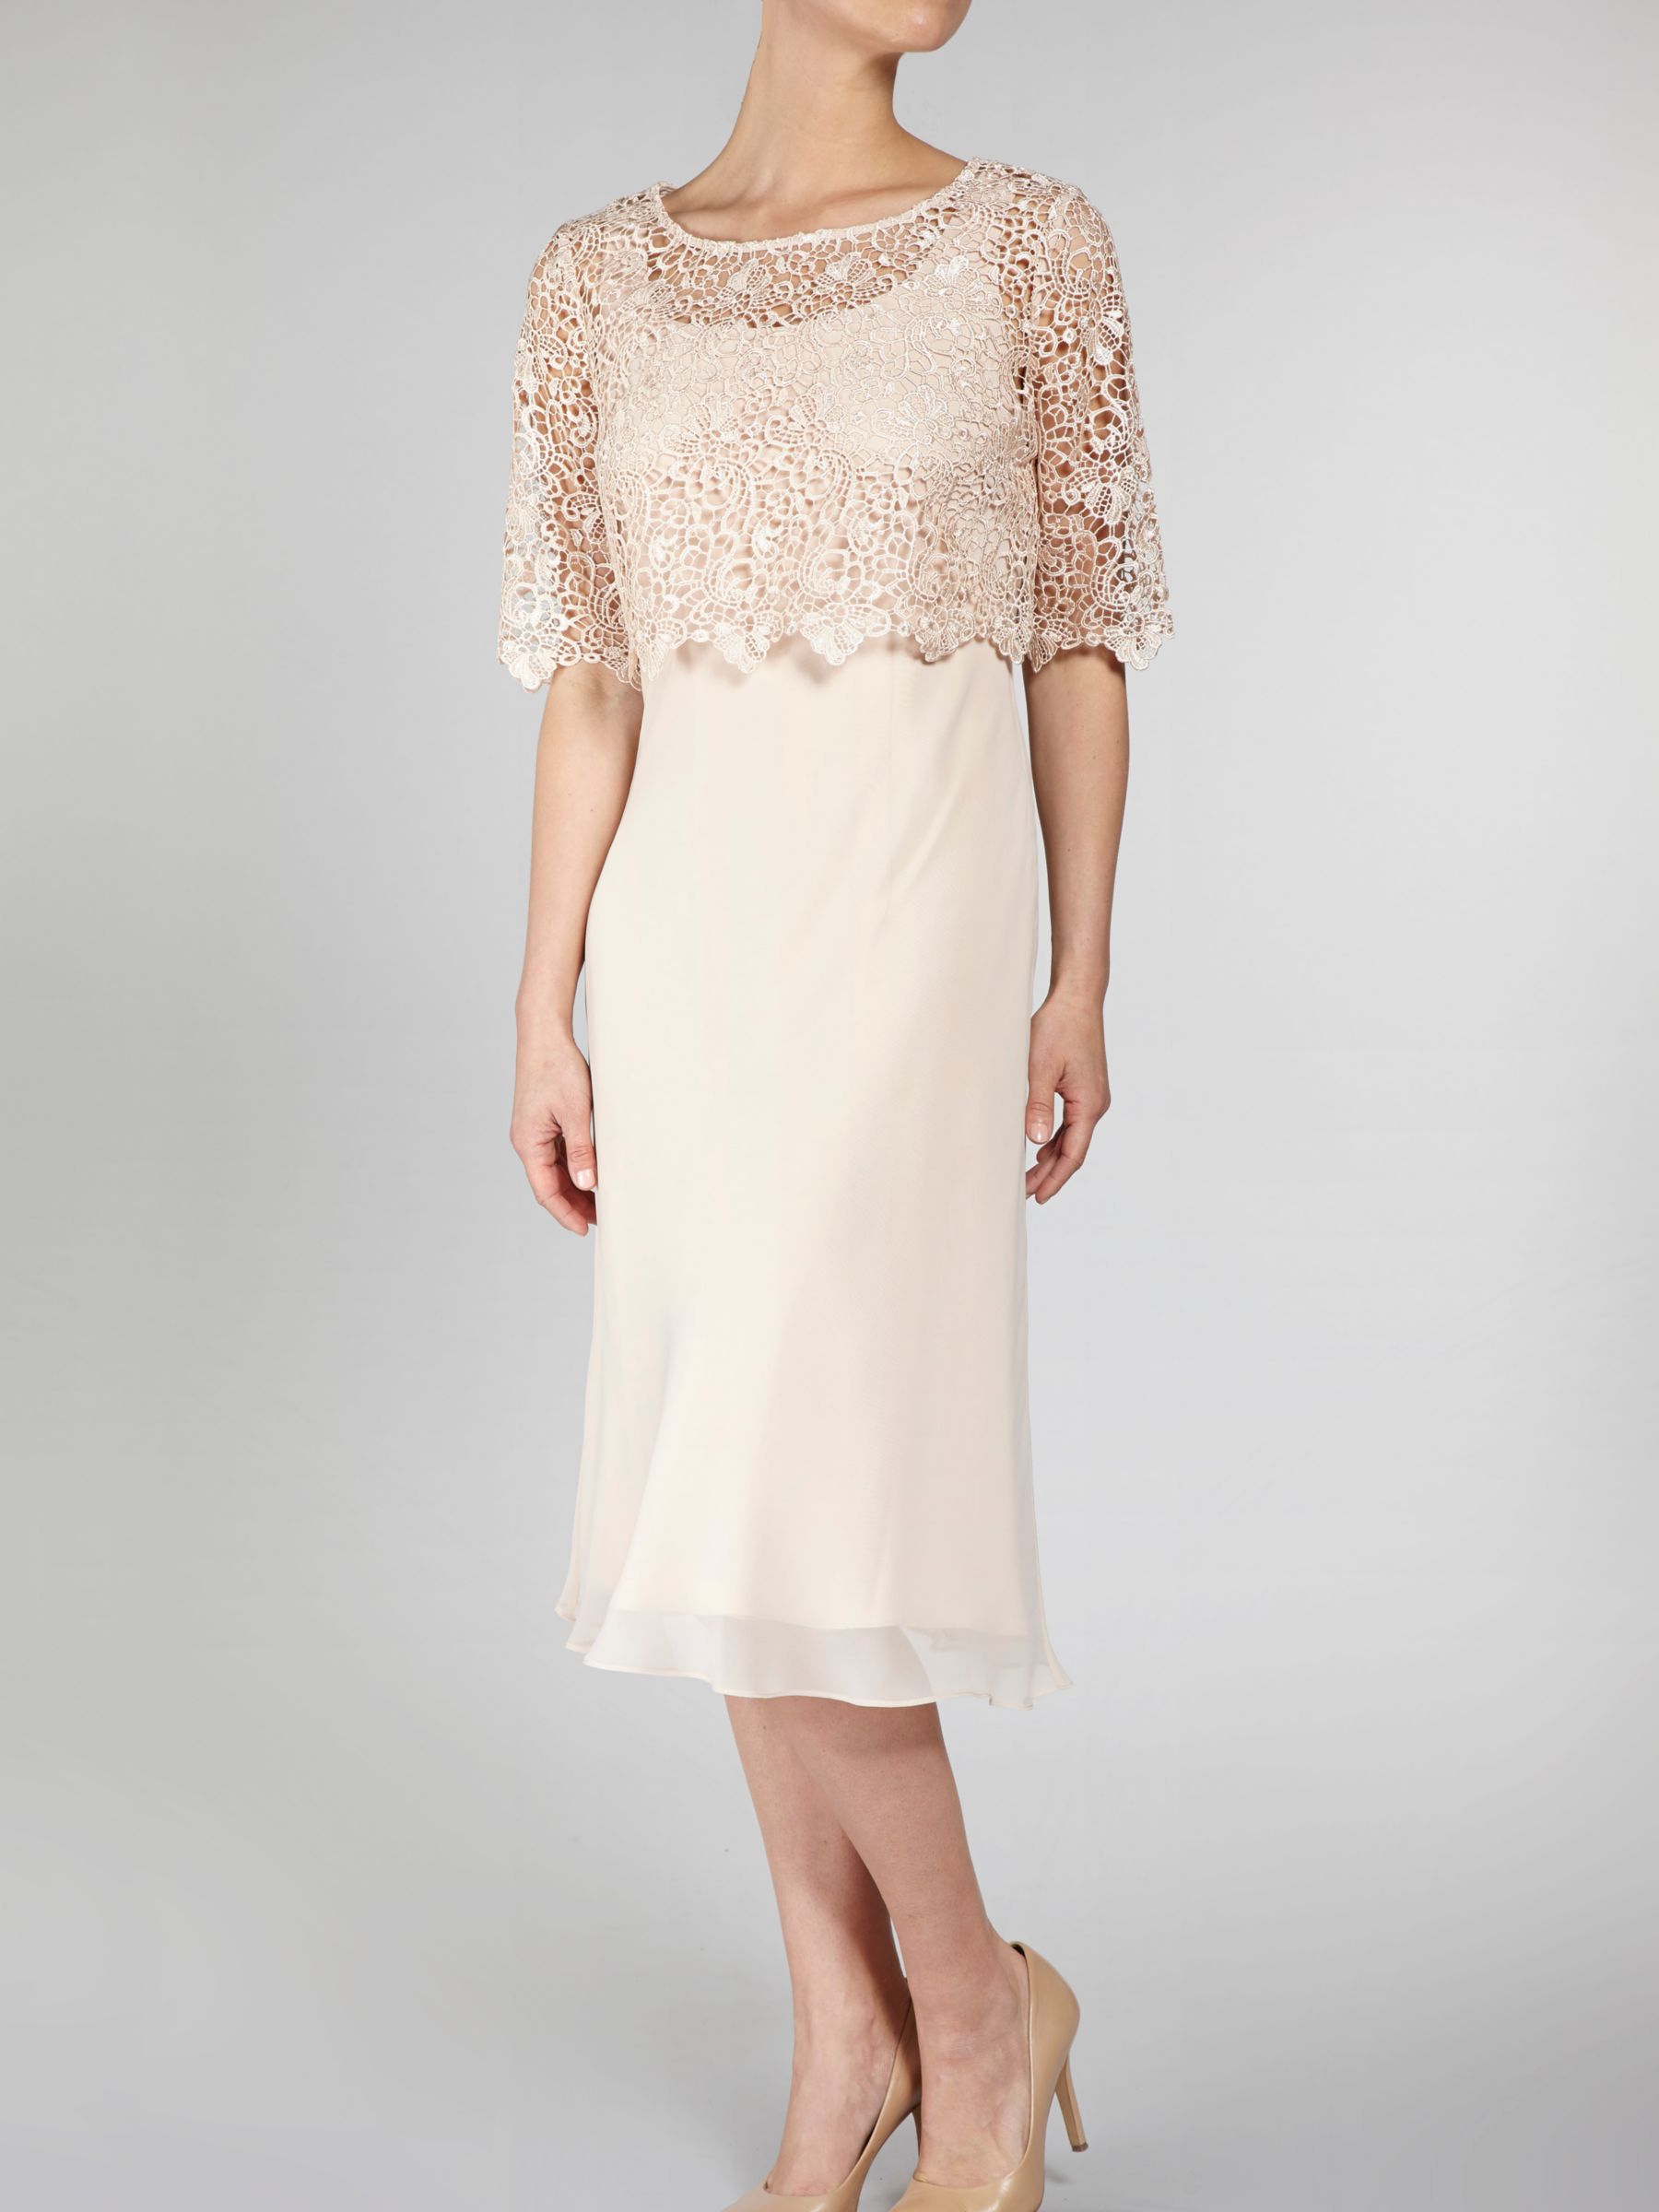 Gina Bacconi Chiffon Dress With Guipure Lace Top, Beige at John Lewis ...